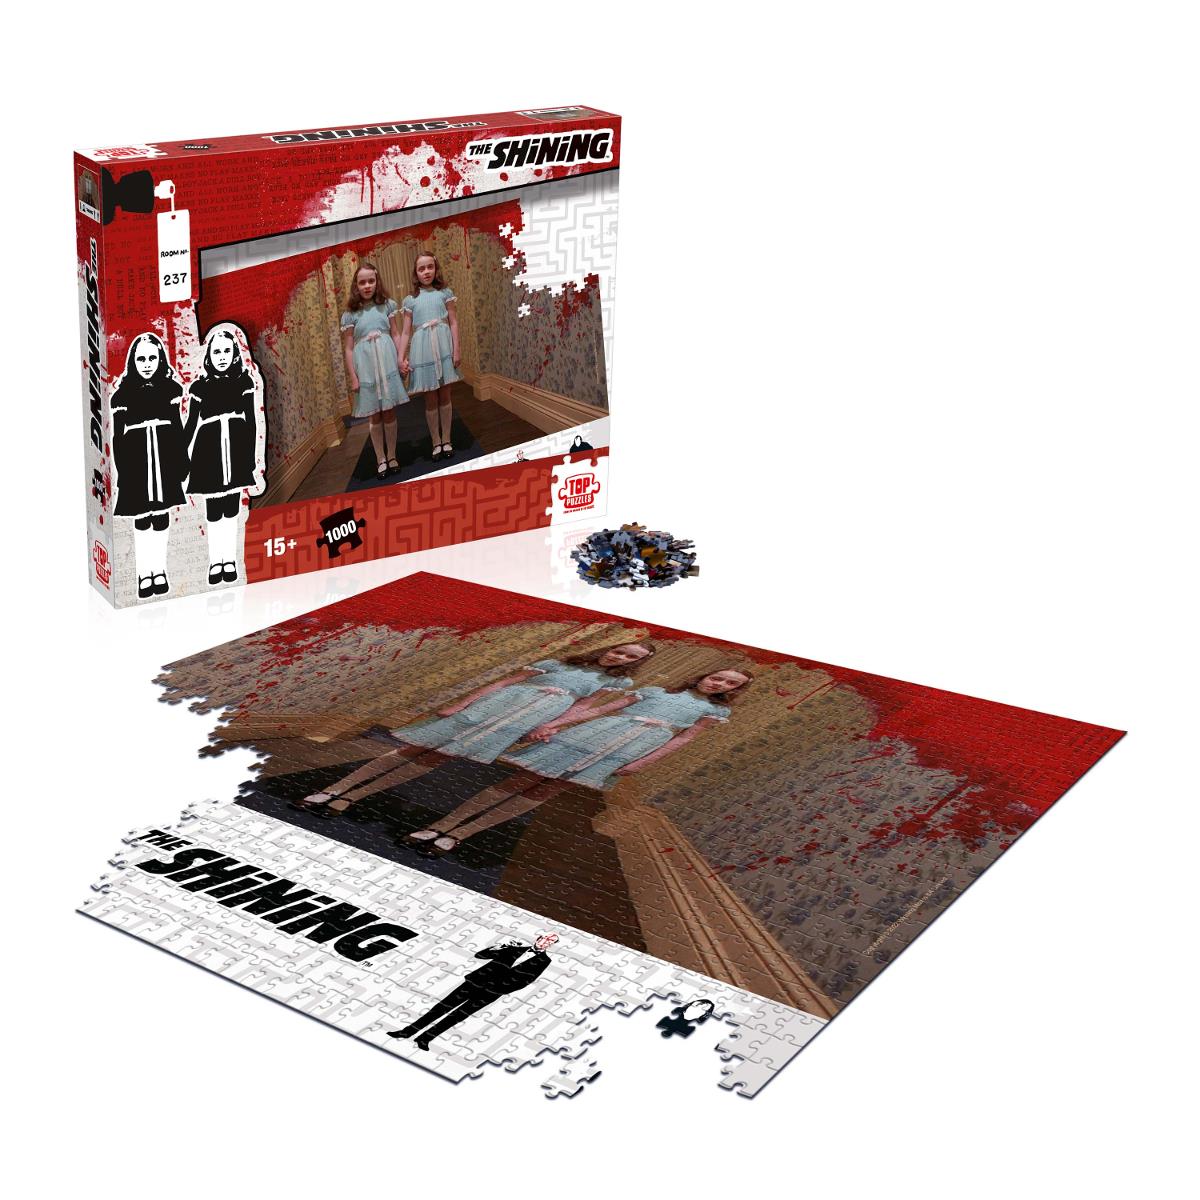 The Shining 1000 Piece Jigsaw Puzzle